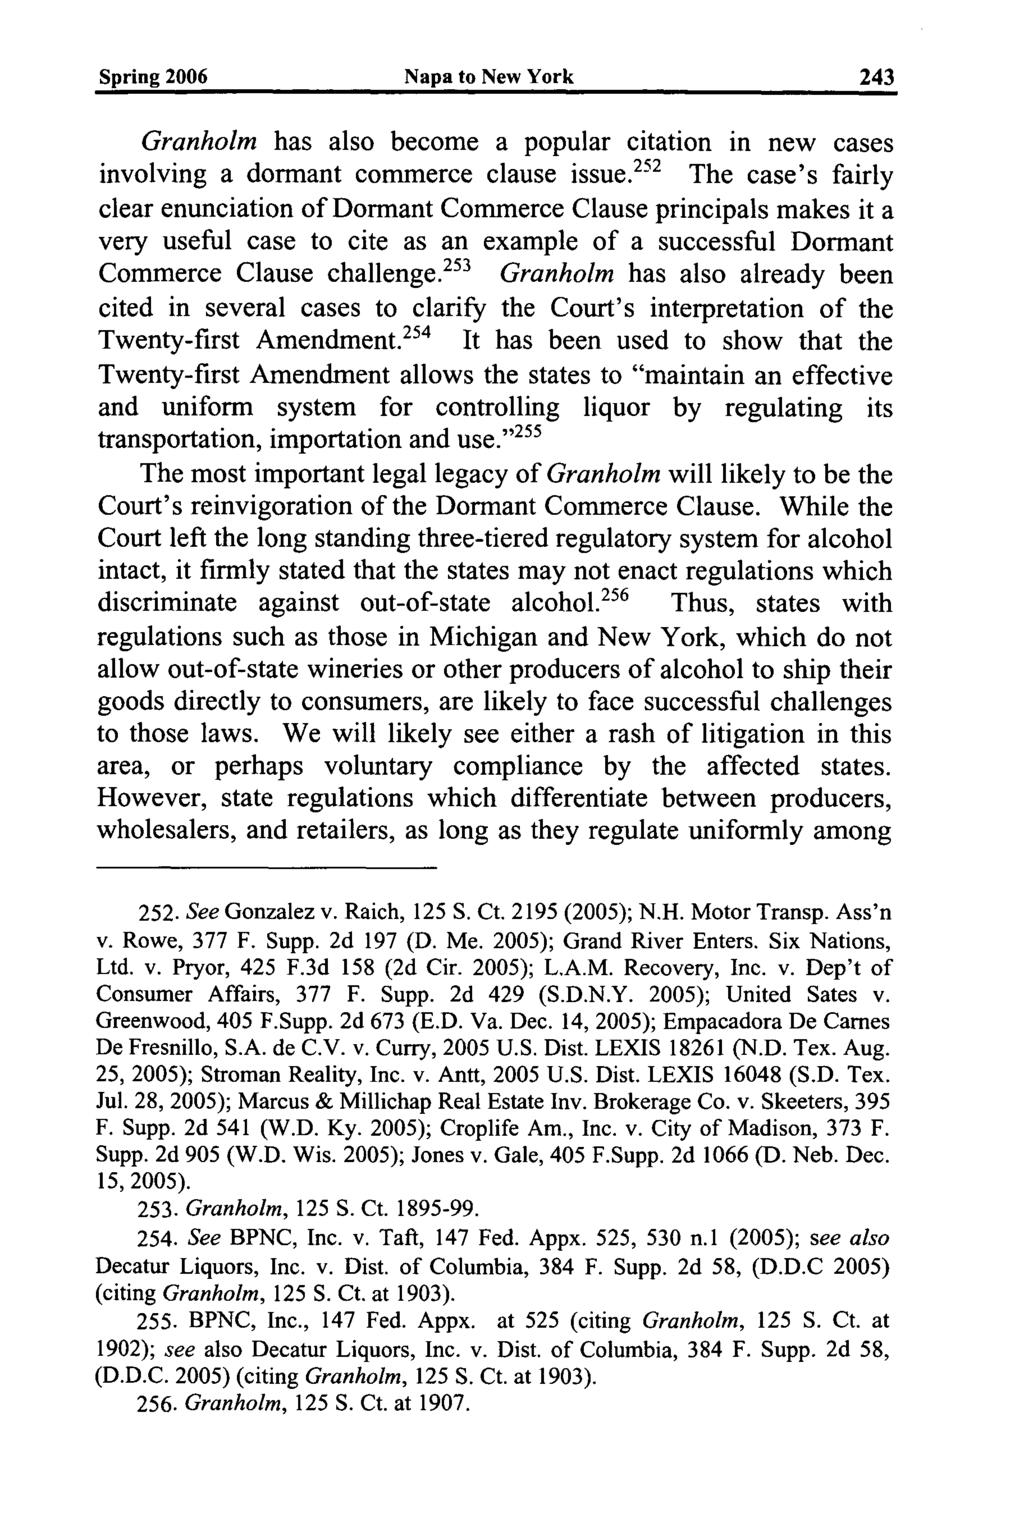 Spring 2006 Napa to New York Granholm has also become a popular citation in new cases 252 involving a dormant commerce clause issue.